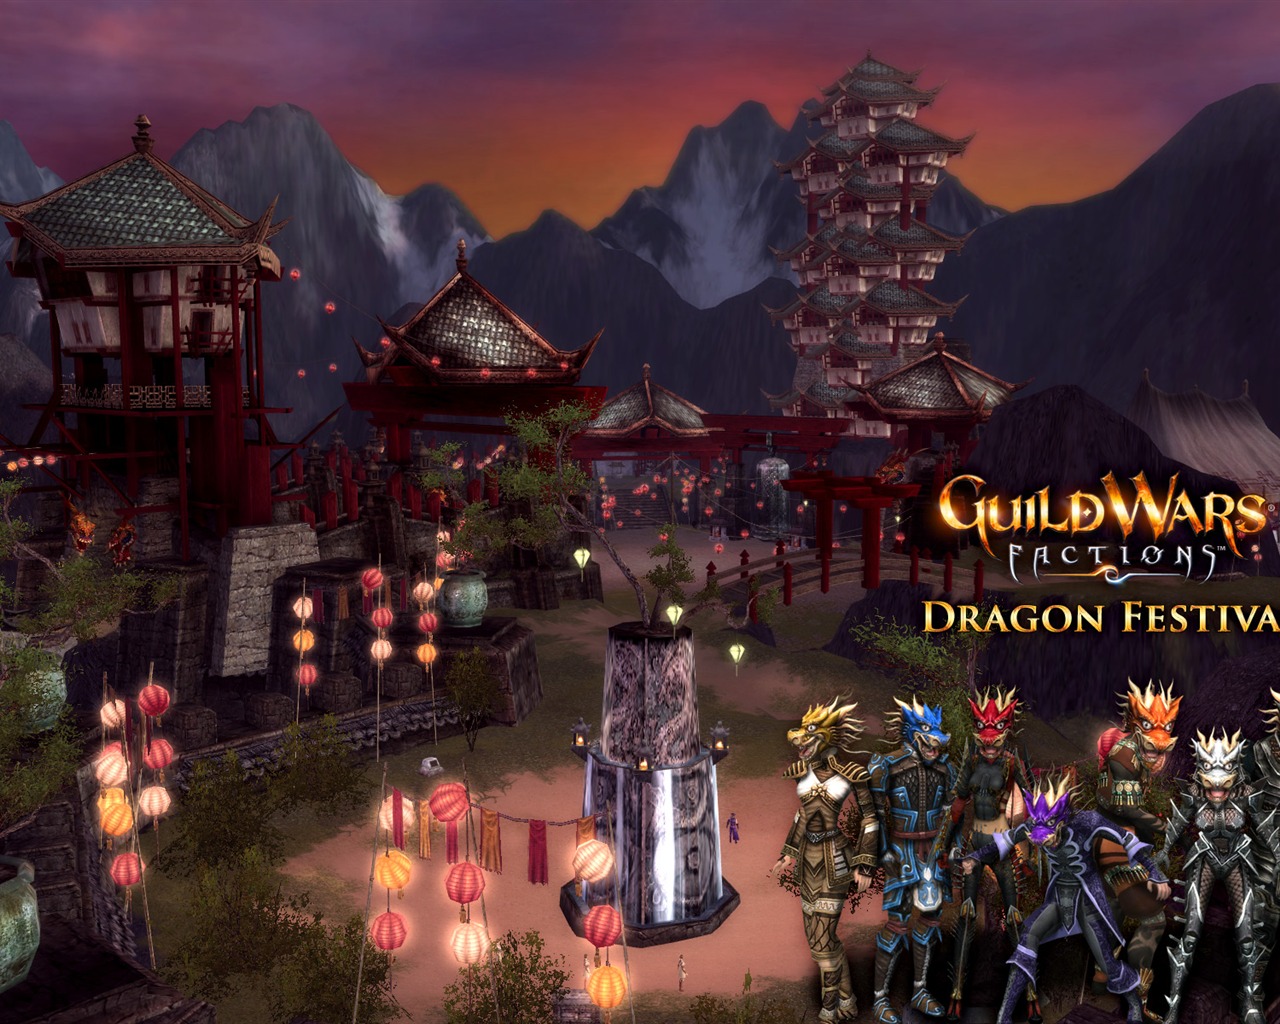 Guildwars tapety (3) #19 - 1280x1024